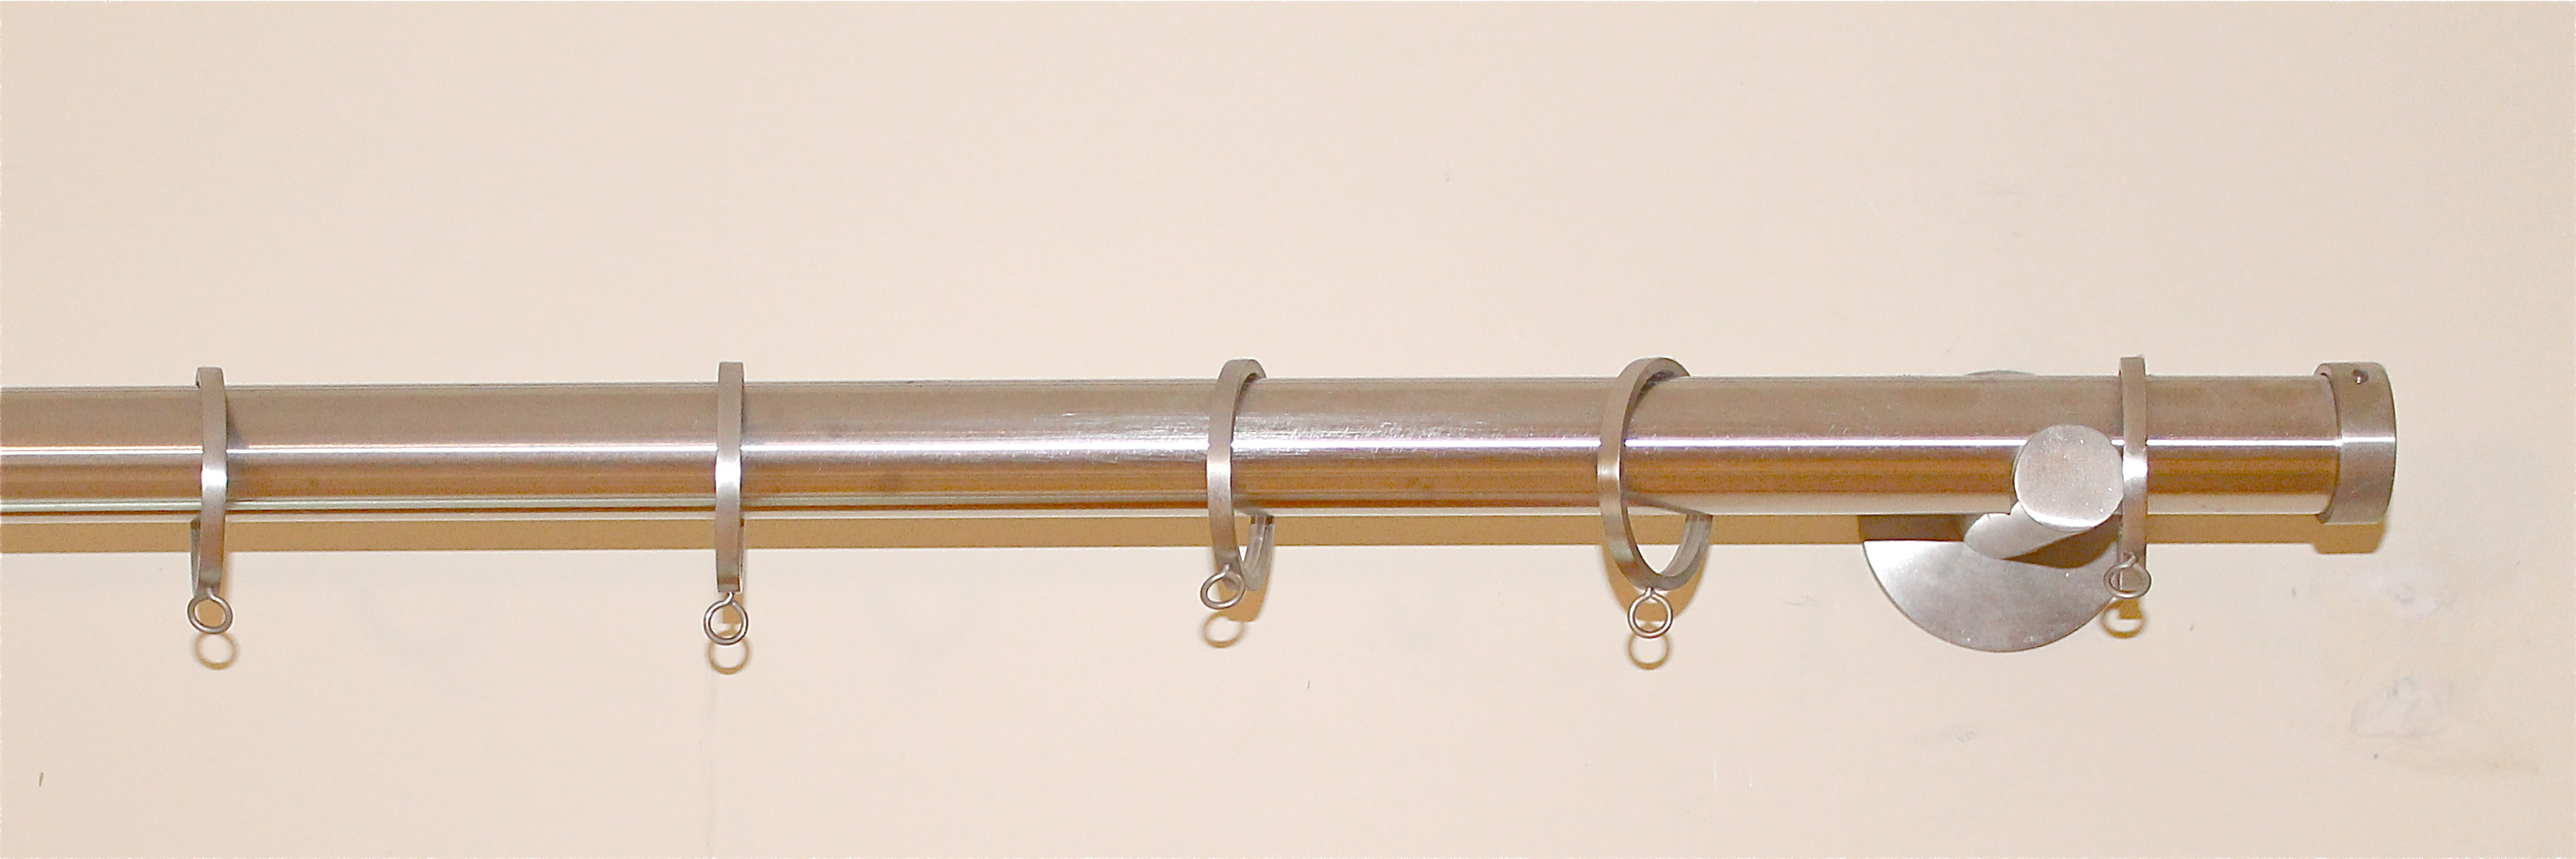 Drapery Rod with rings